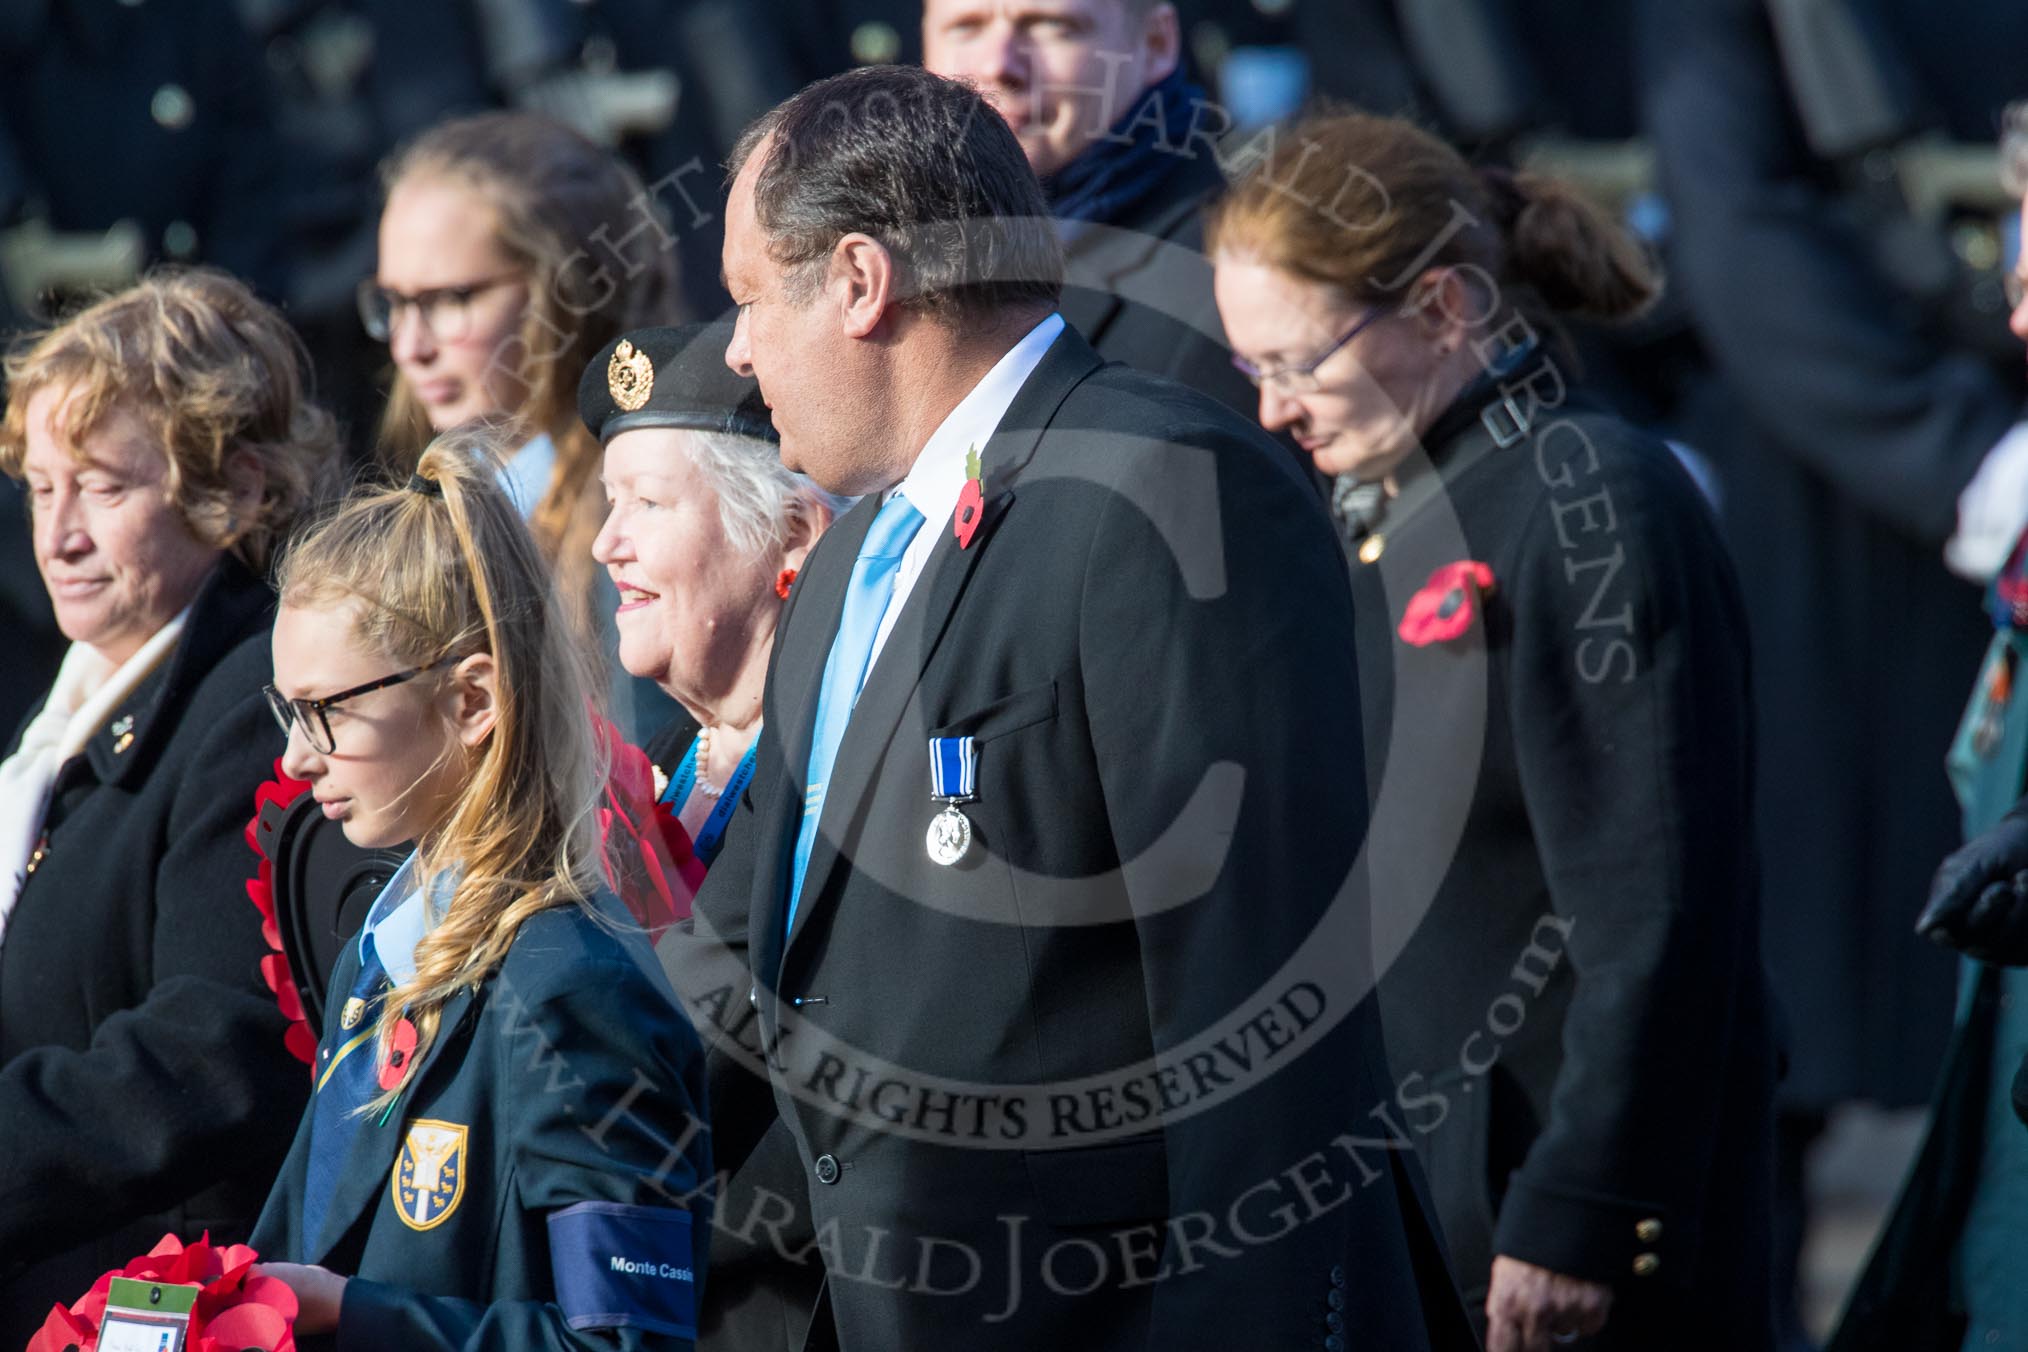 The Monte Cassino Society (Group F6, 29 members) during the Royal British Legion March Past on Remembrance Sunday at the Cenotaph, Whitehall, Westminster, London, 11 November 2018, 11:50.